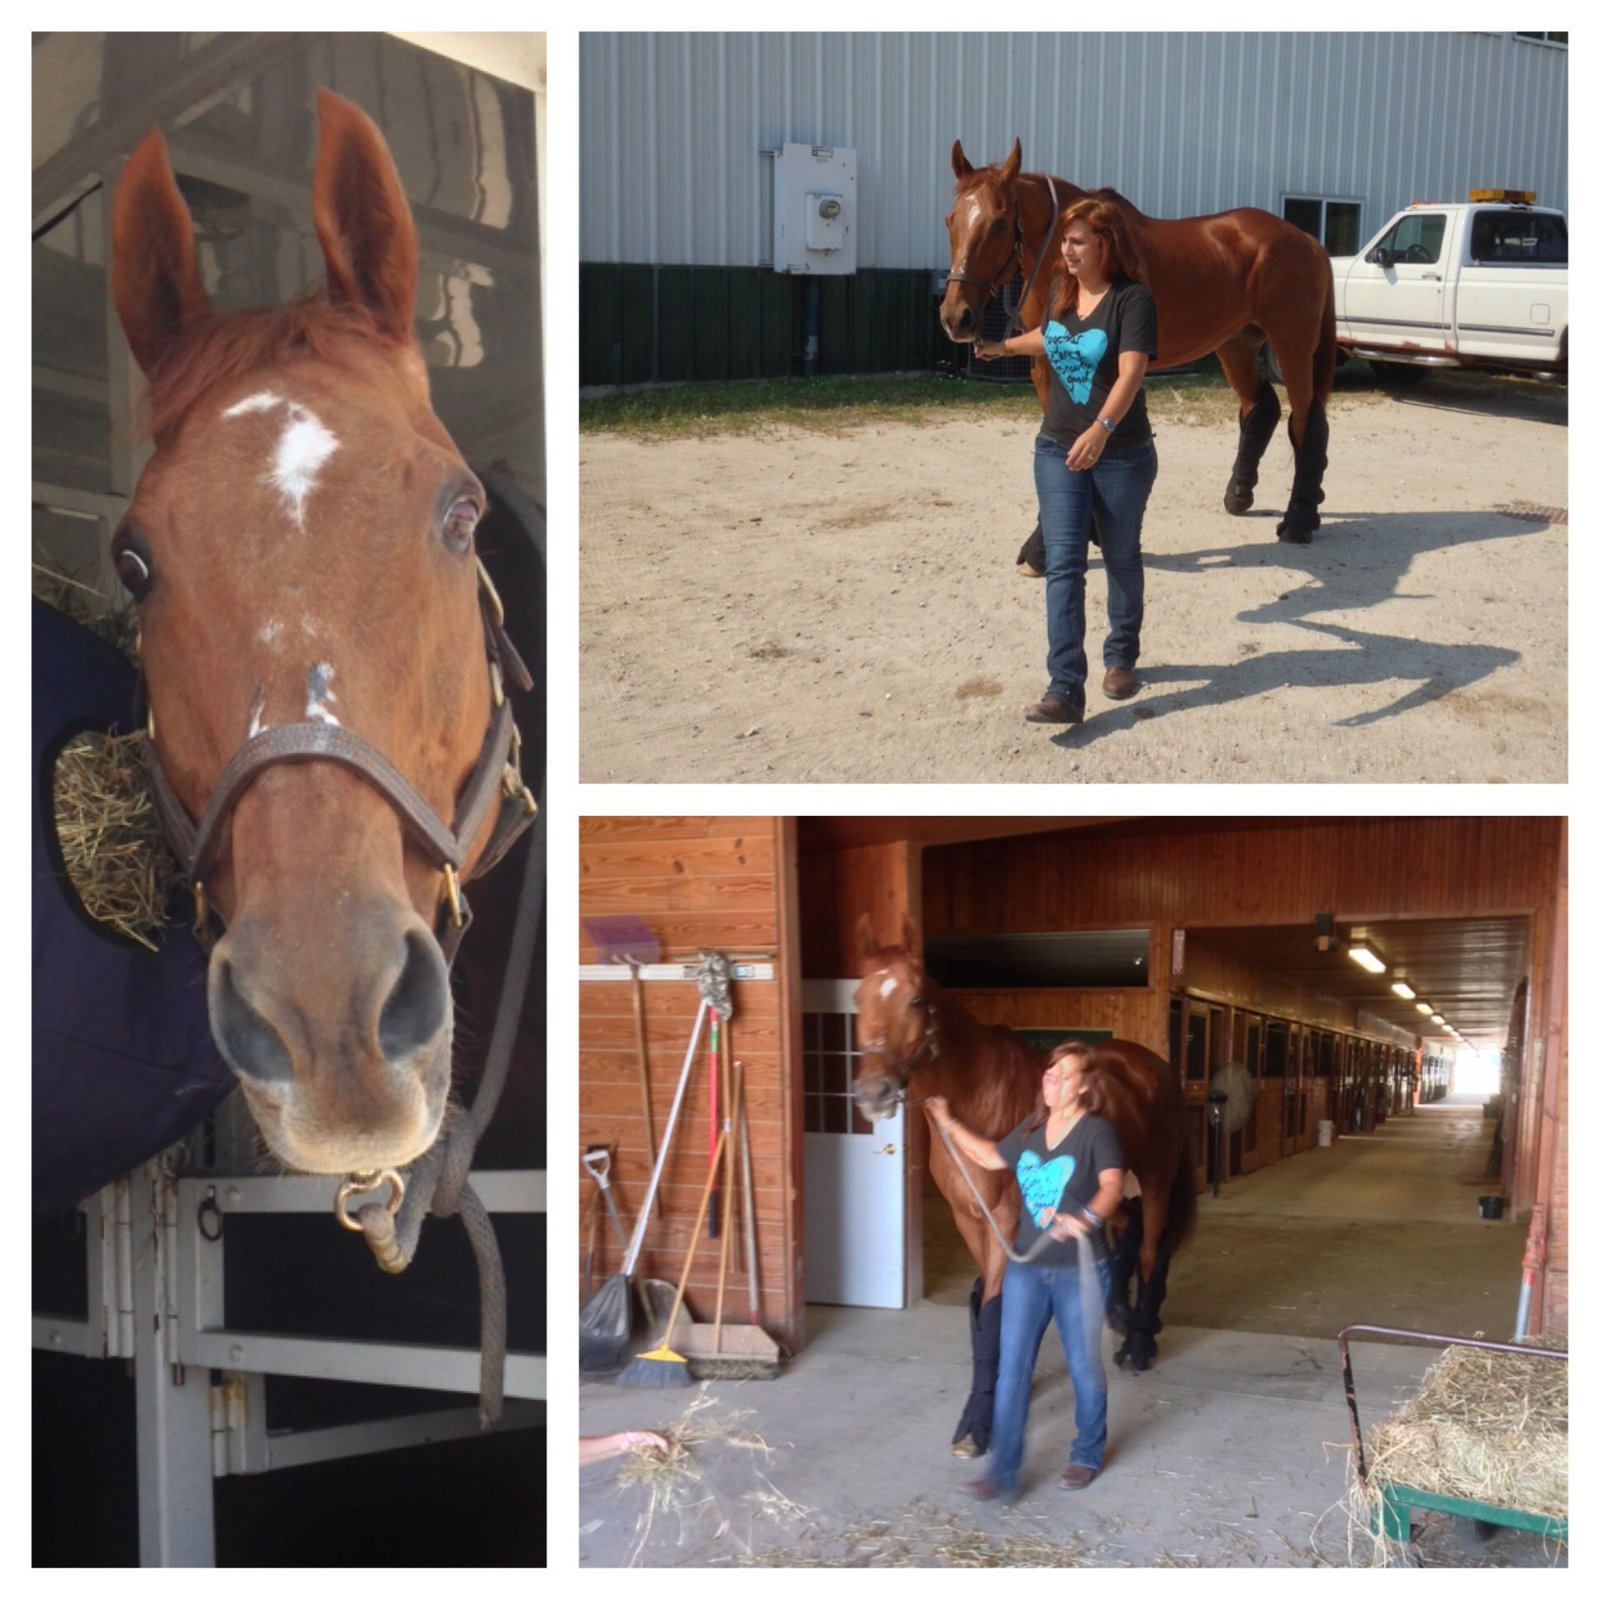 Collage of images with horse at a barn